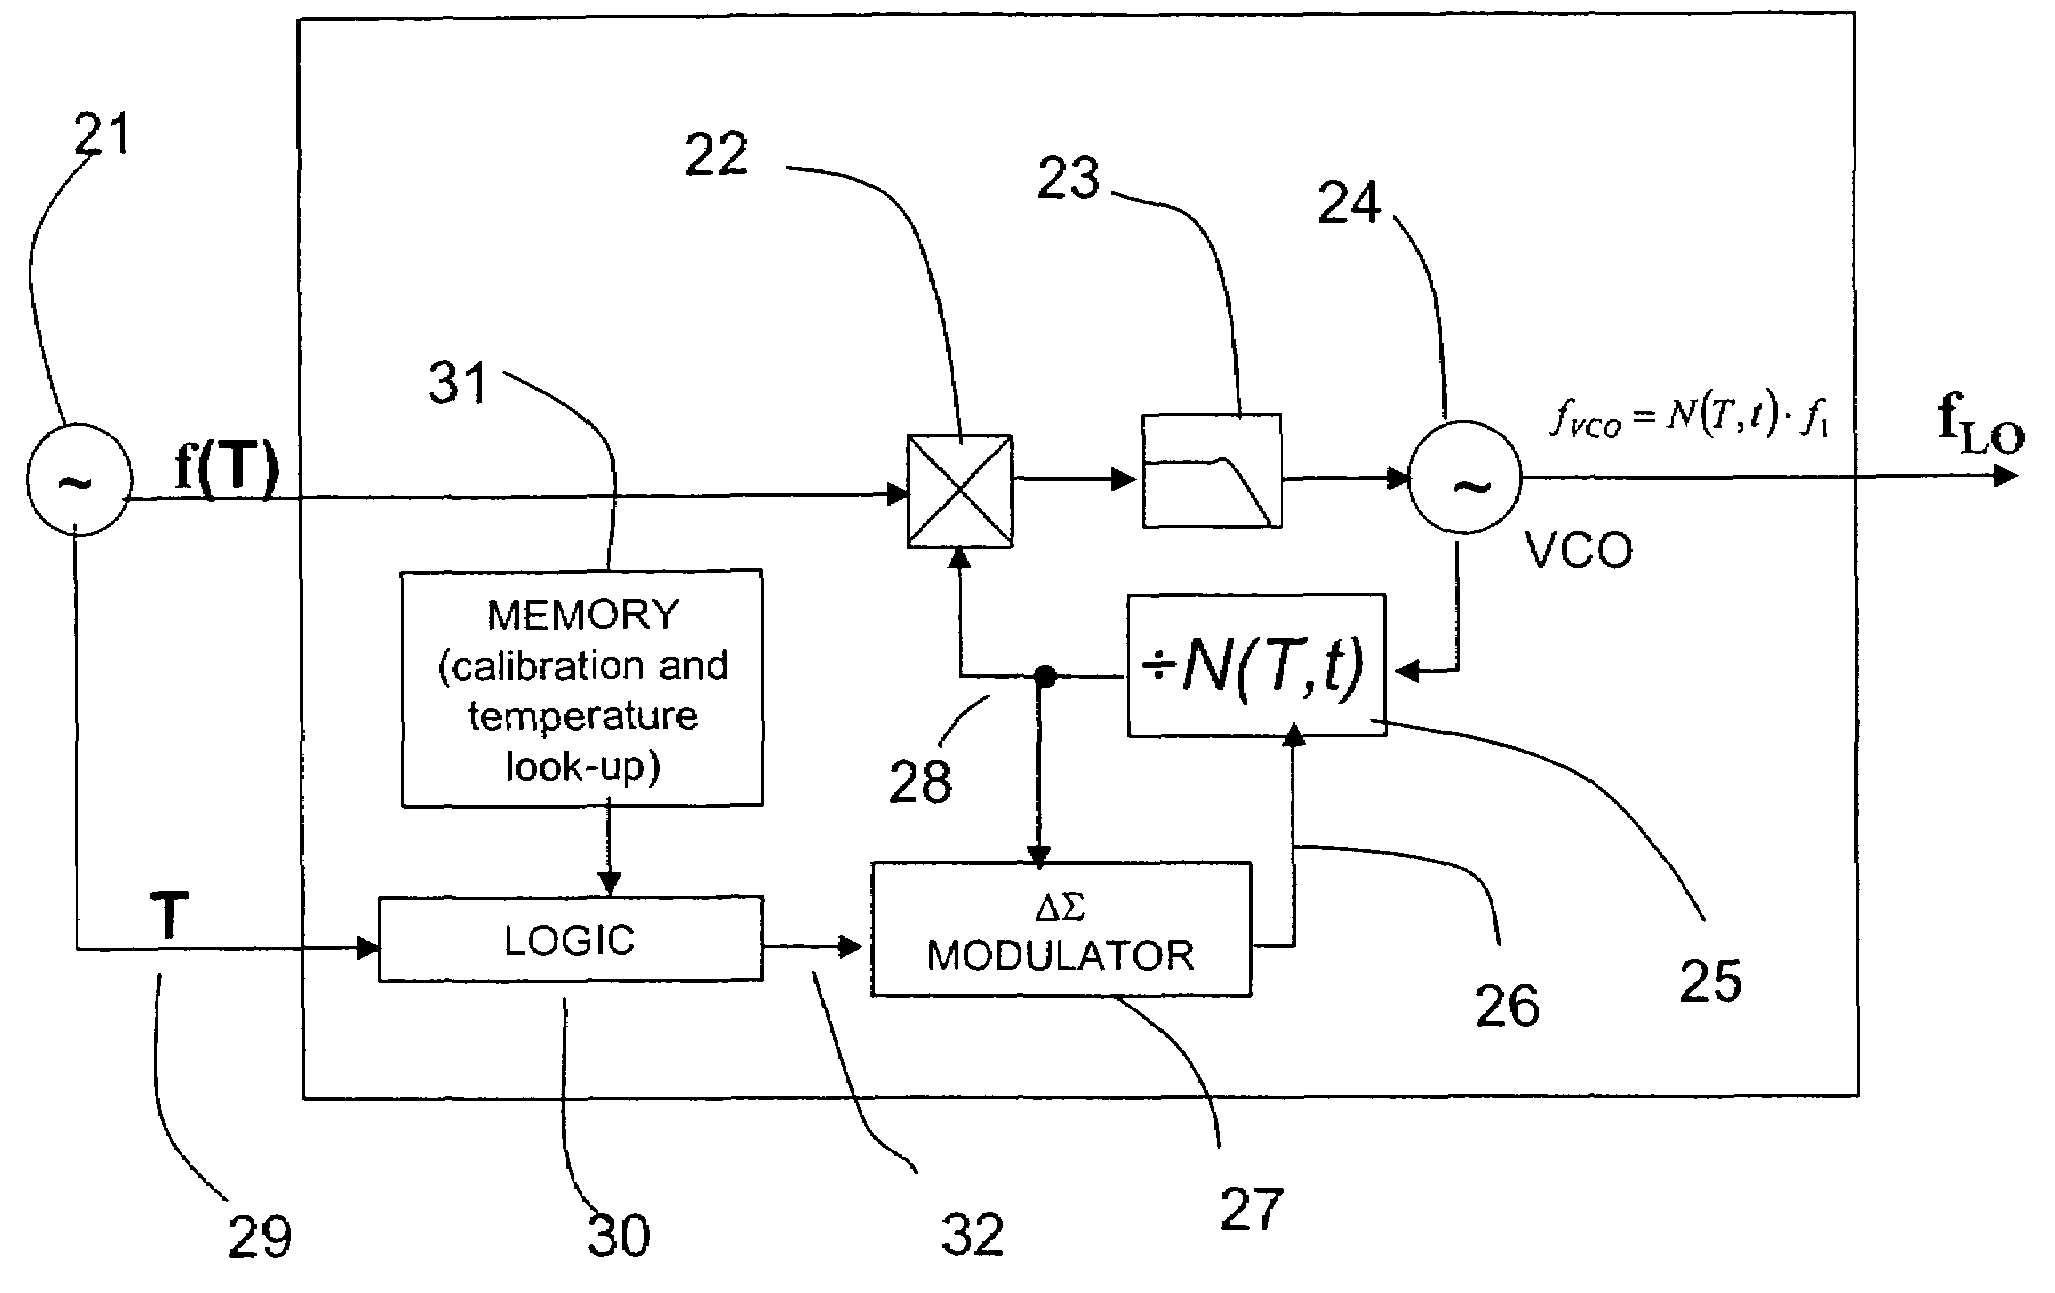 Multi-mode frequency synthesizer with temperature compensation